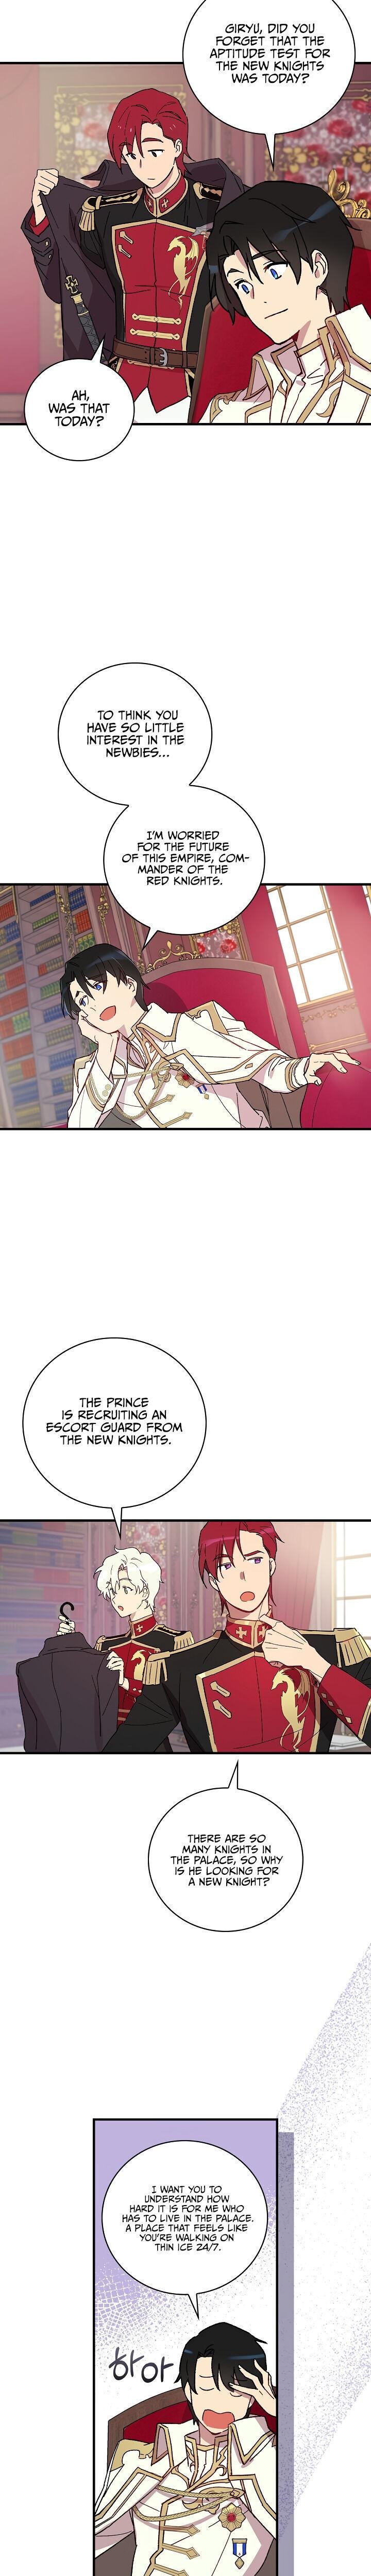 a-red-knight-does-not-blindly-follow-money-chap-3-14